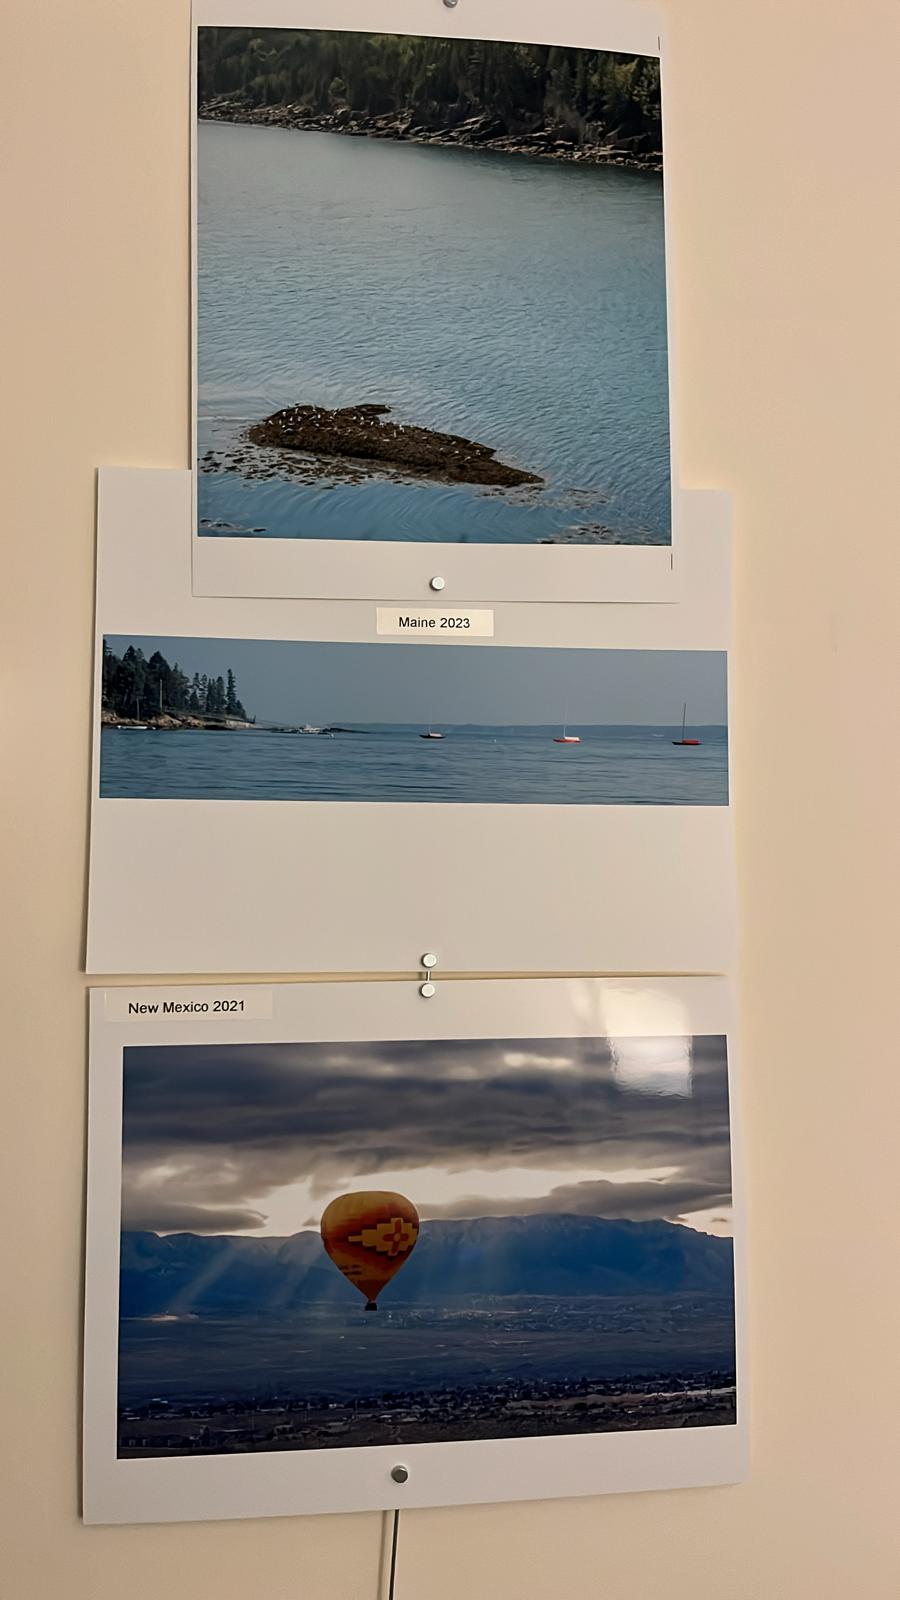 printed photos of places in Maine, and one of a hot air balloon in New Mexico